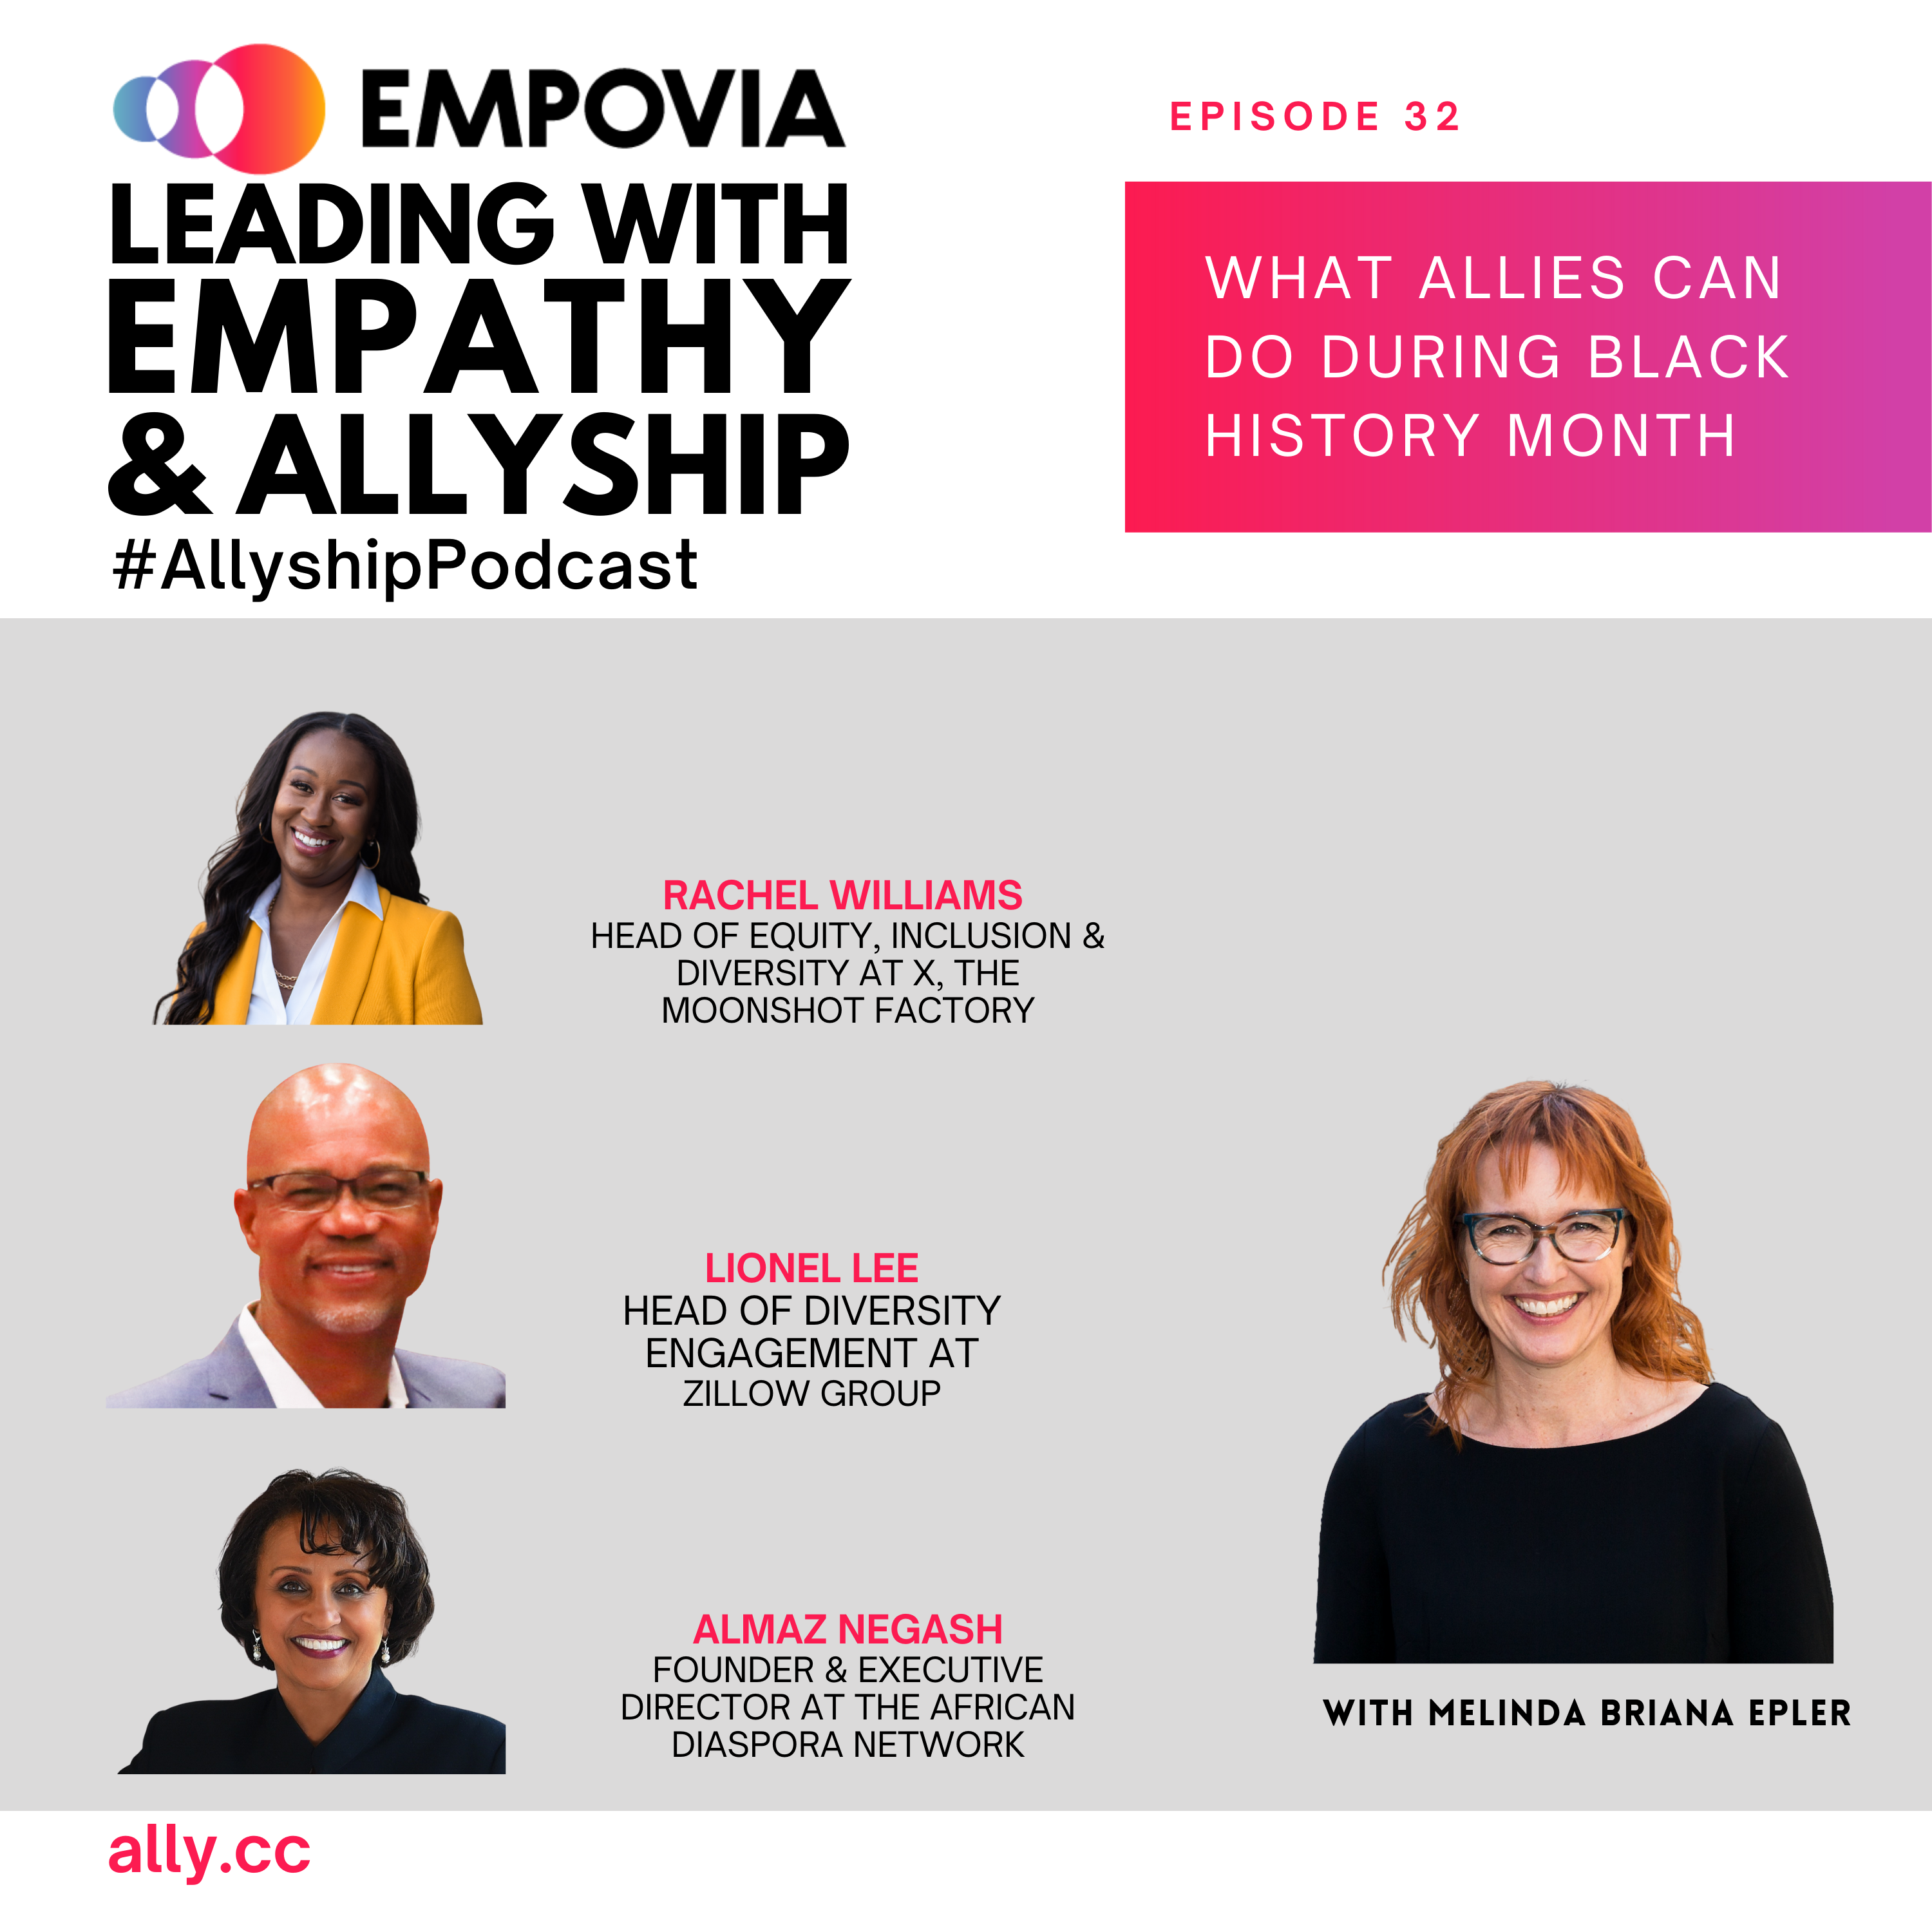 Leading With Empathy & Allyship promo with the Empovia logo and photos of host Melinda Briana Epler, a White woman with red hair and glasses, Rachel Williams, a Black woman with long black hair and glasses, Lionel Lee, a Black man with glasses, and Almaz Negash, a Black woman with short hair and red jacket.